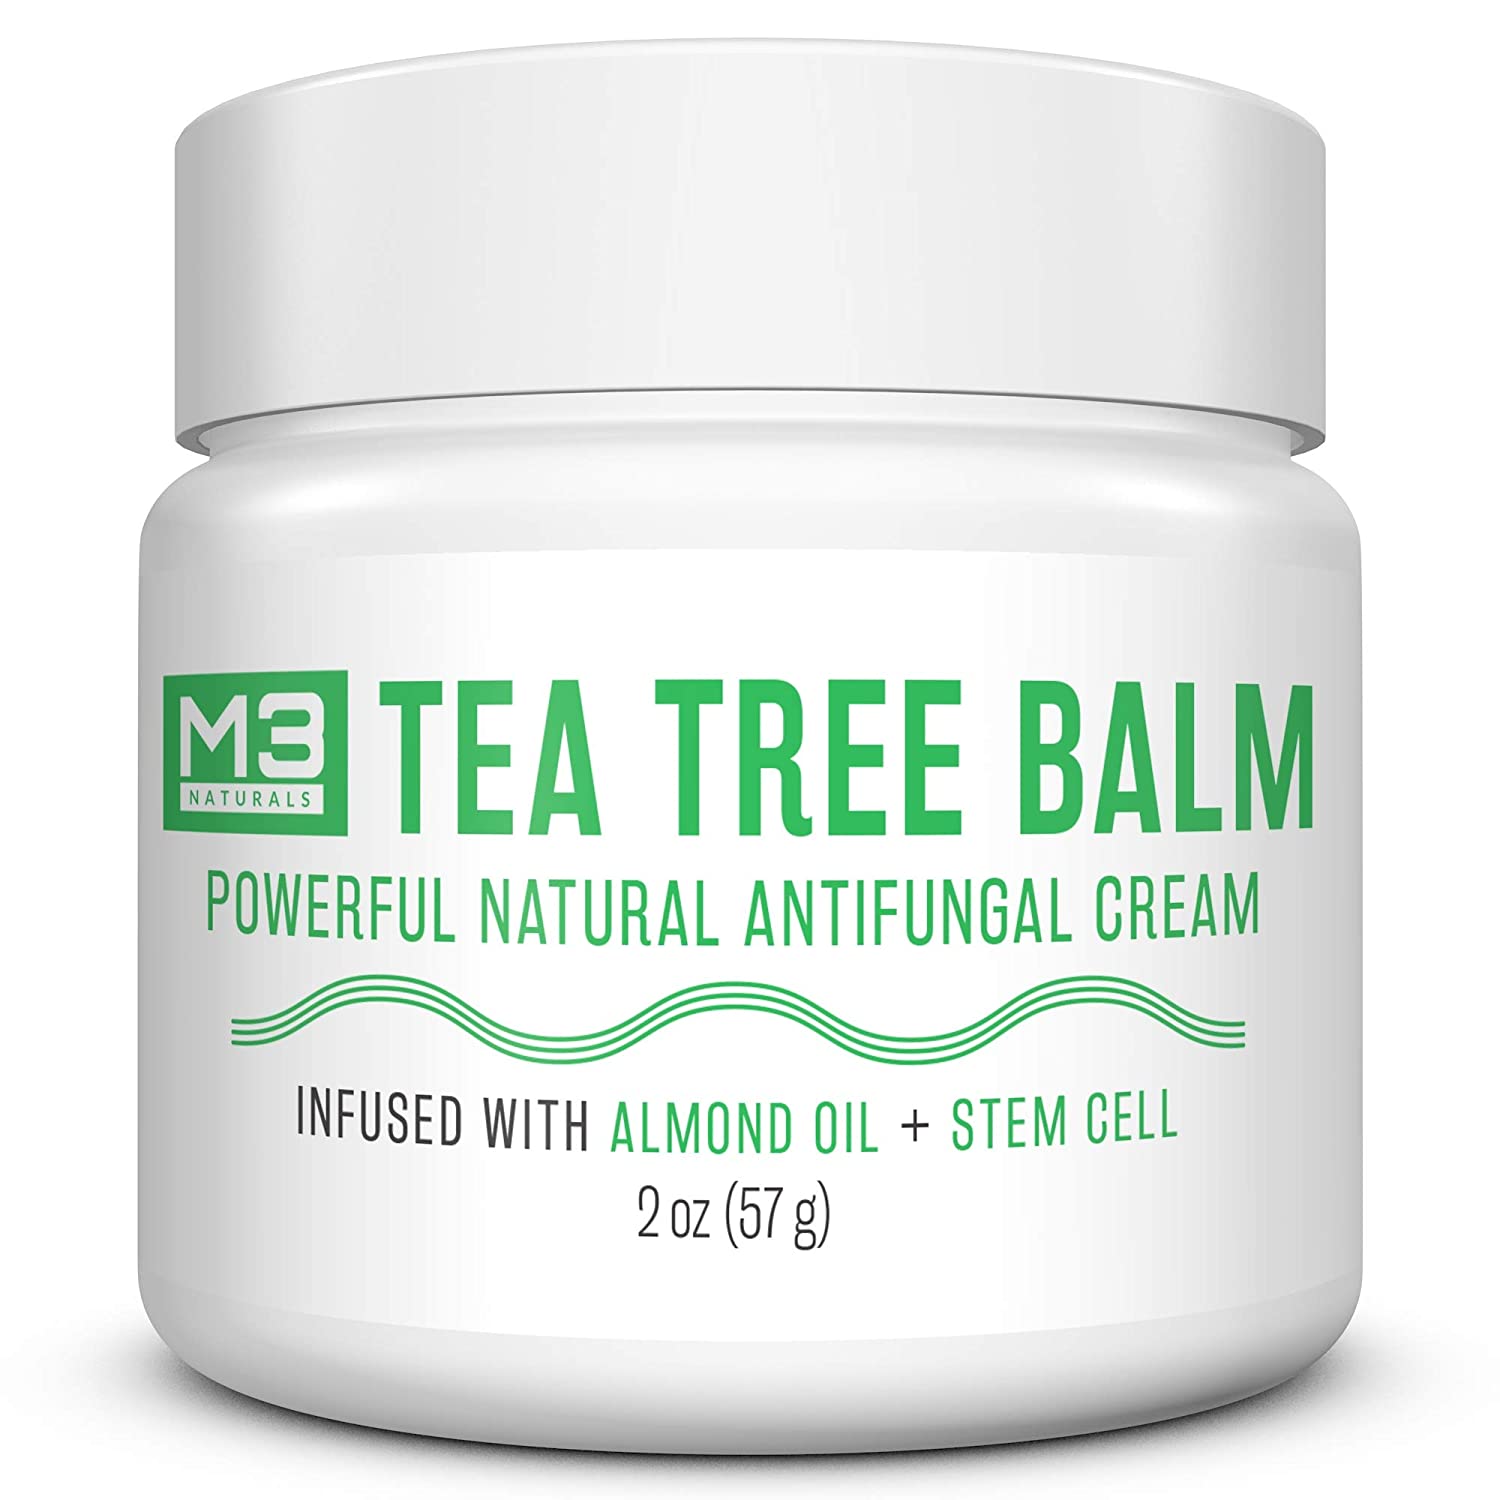 M3 Naturals Natural Tea Tree Balm Infused with Almond Oil